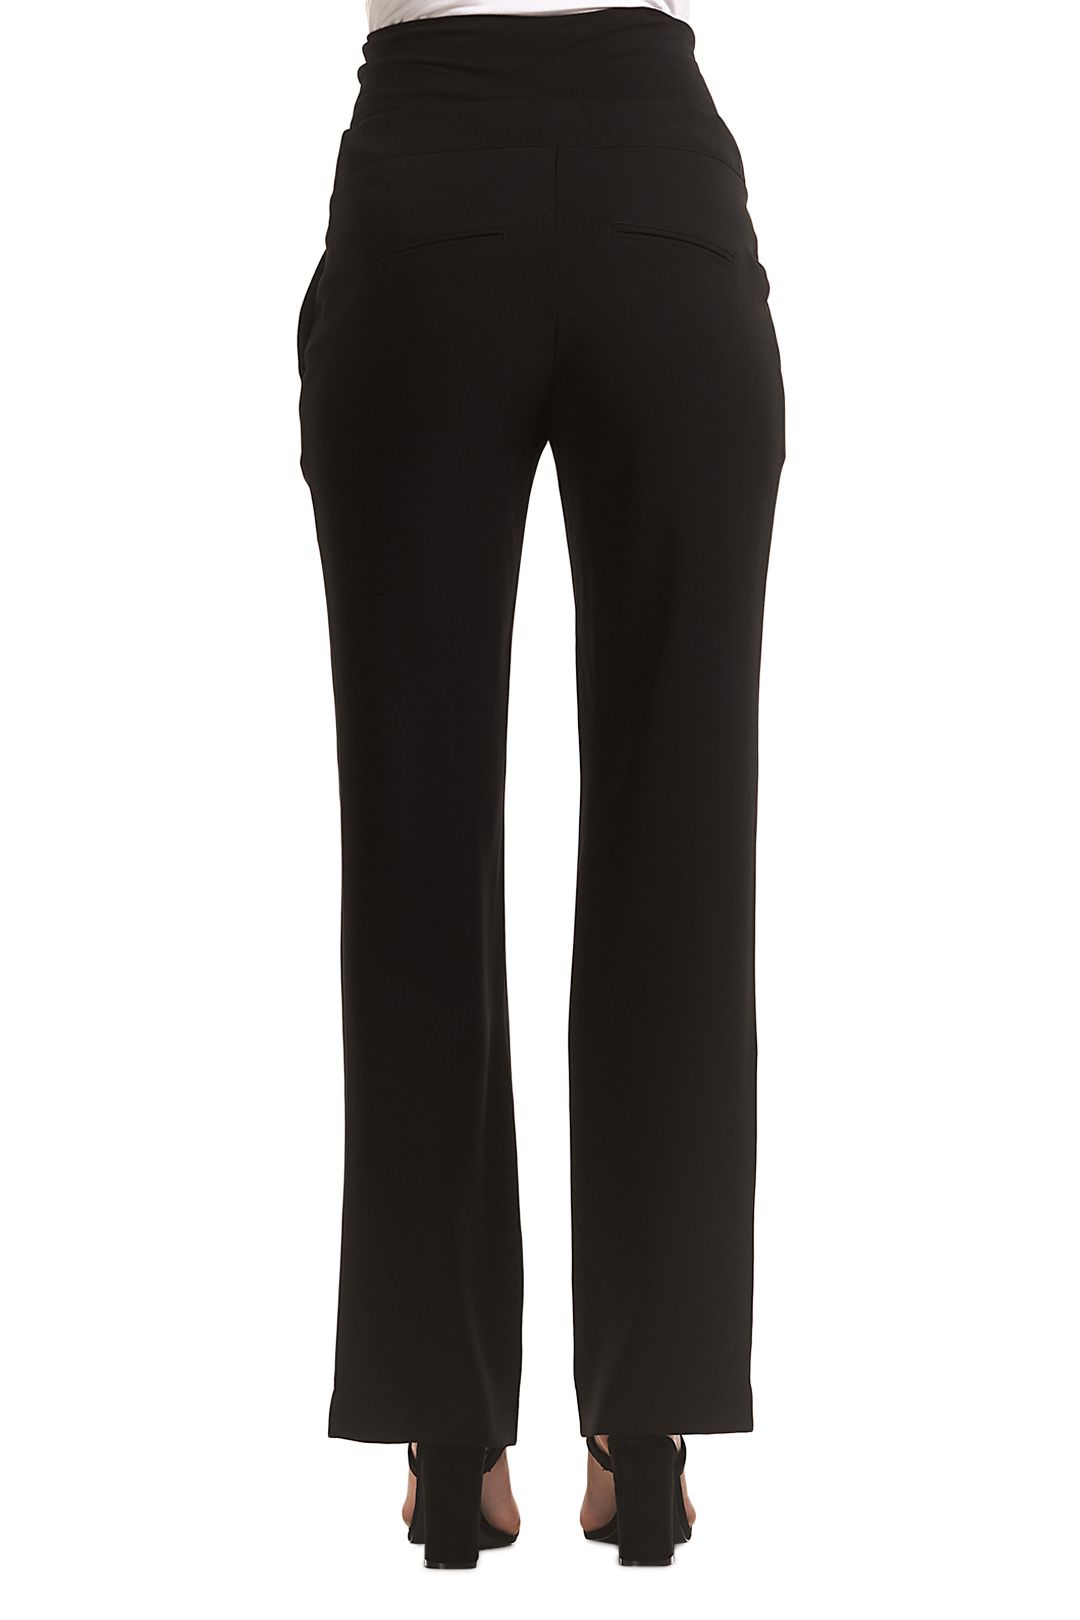 Classic Work Pants in Black Haust by Soon Maternity for Hire | GlamCorner